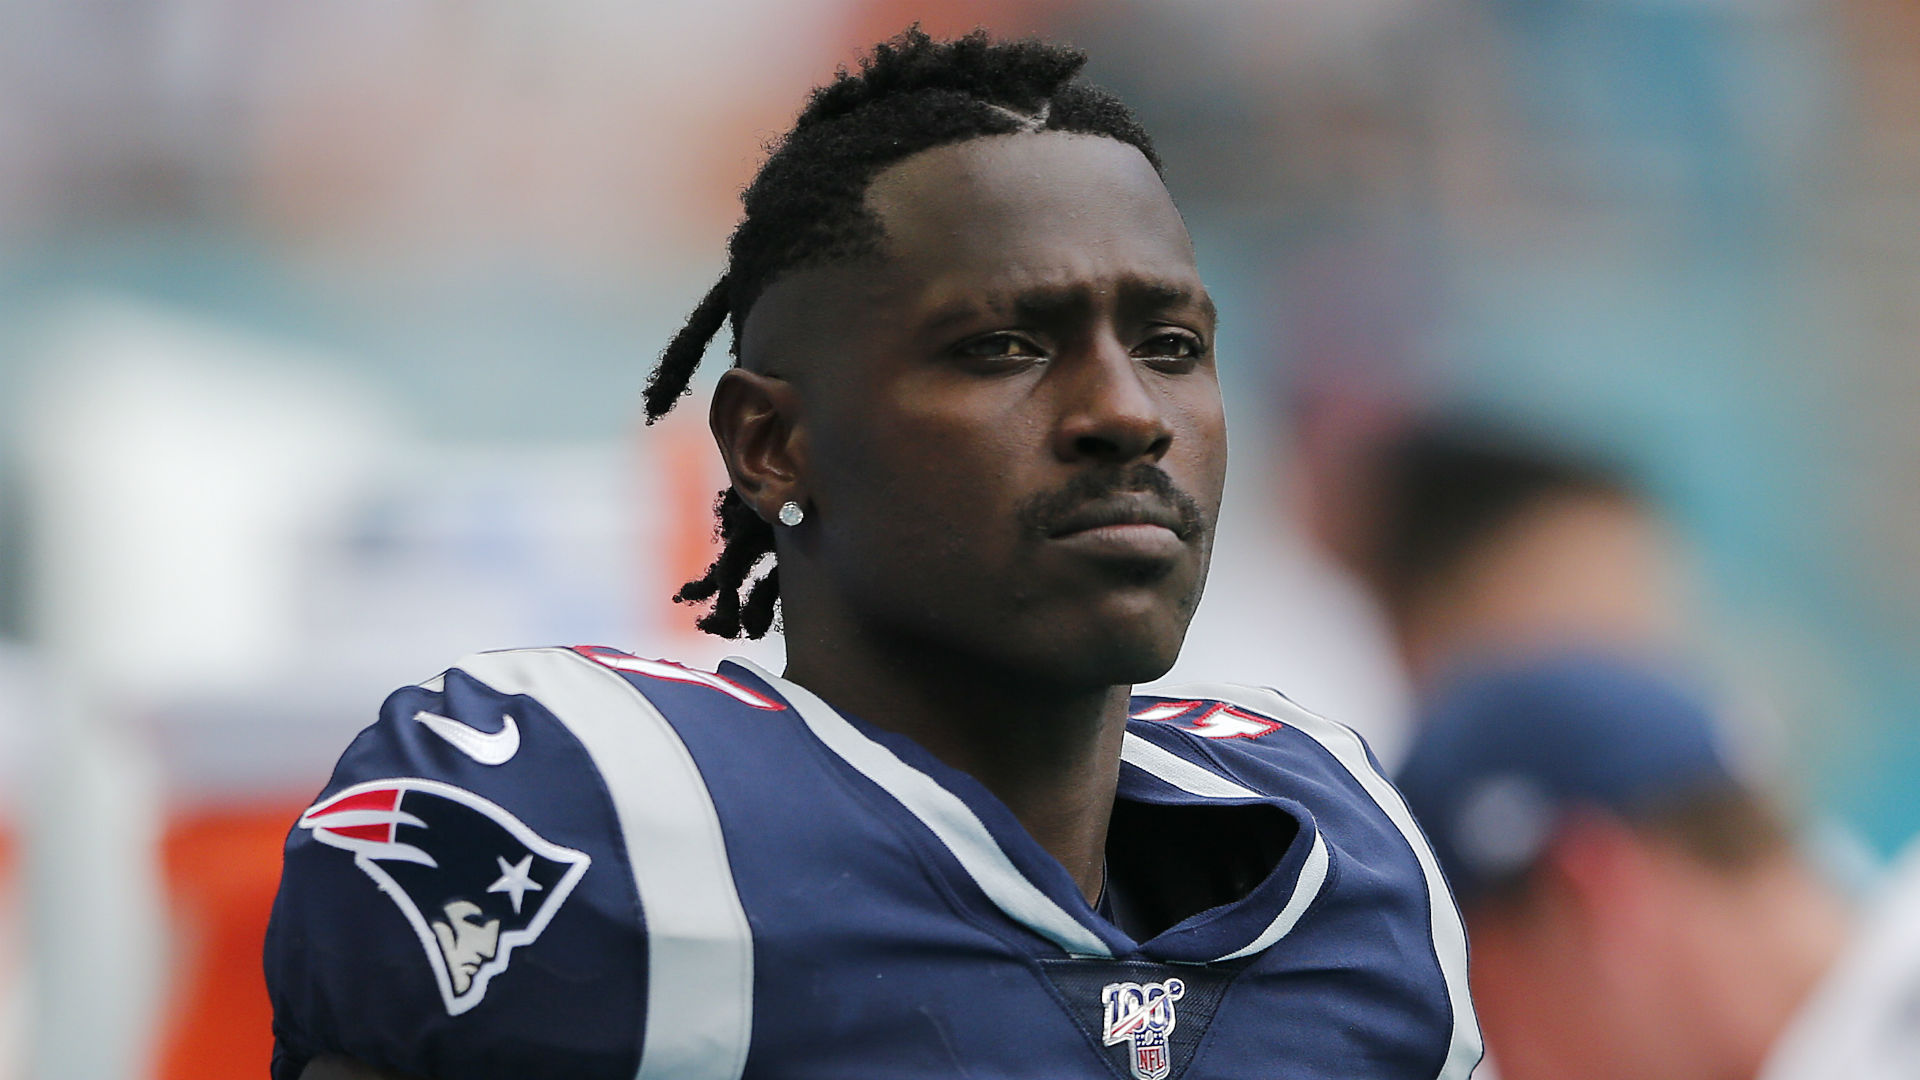 Antonio Brown drawing interest from several NFL teams after Patriots release, report says